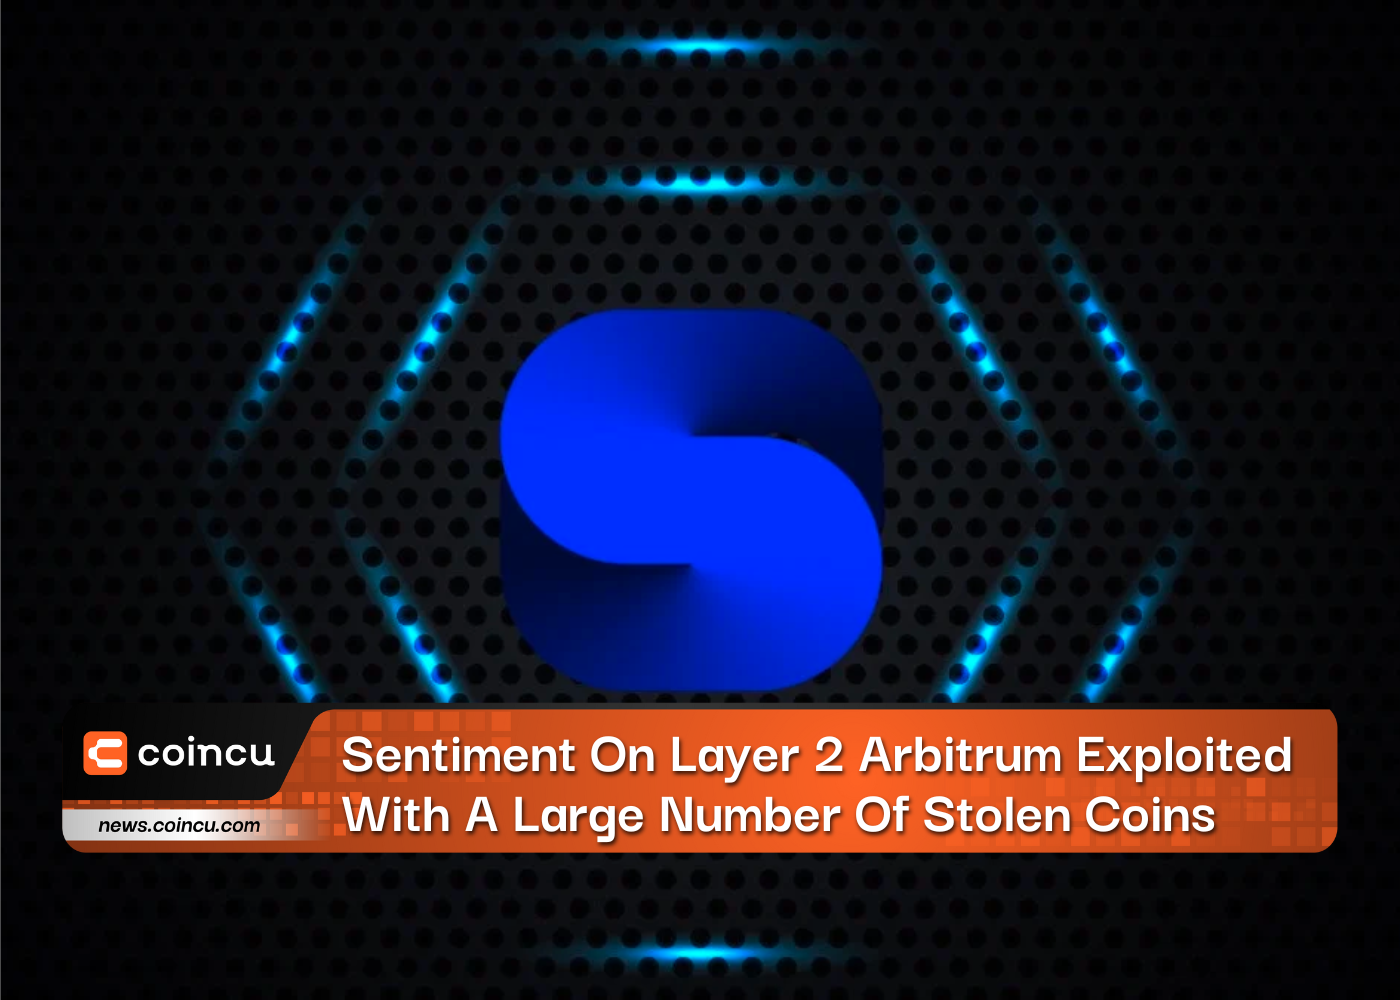 Sentiment On Layer 2 Arbitrum Exploited With A Large Number Of Stolen Coins